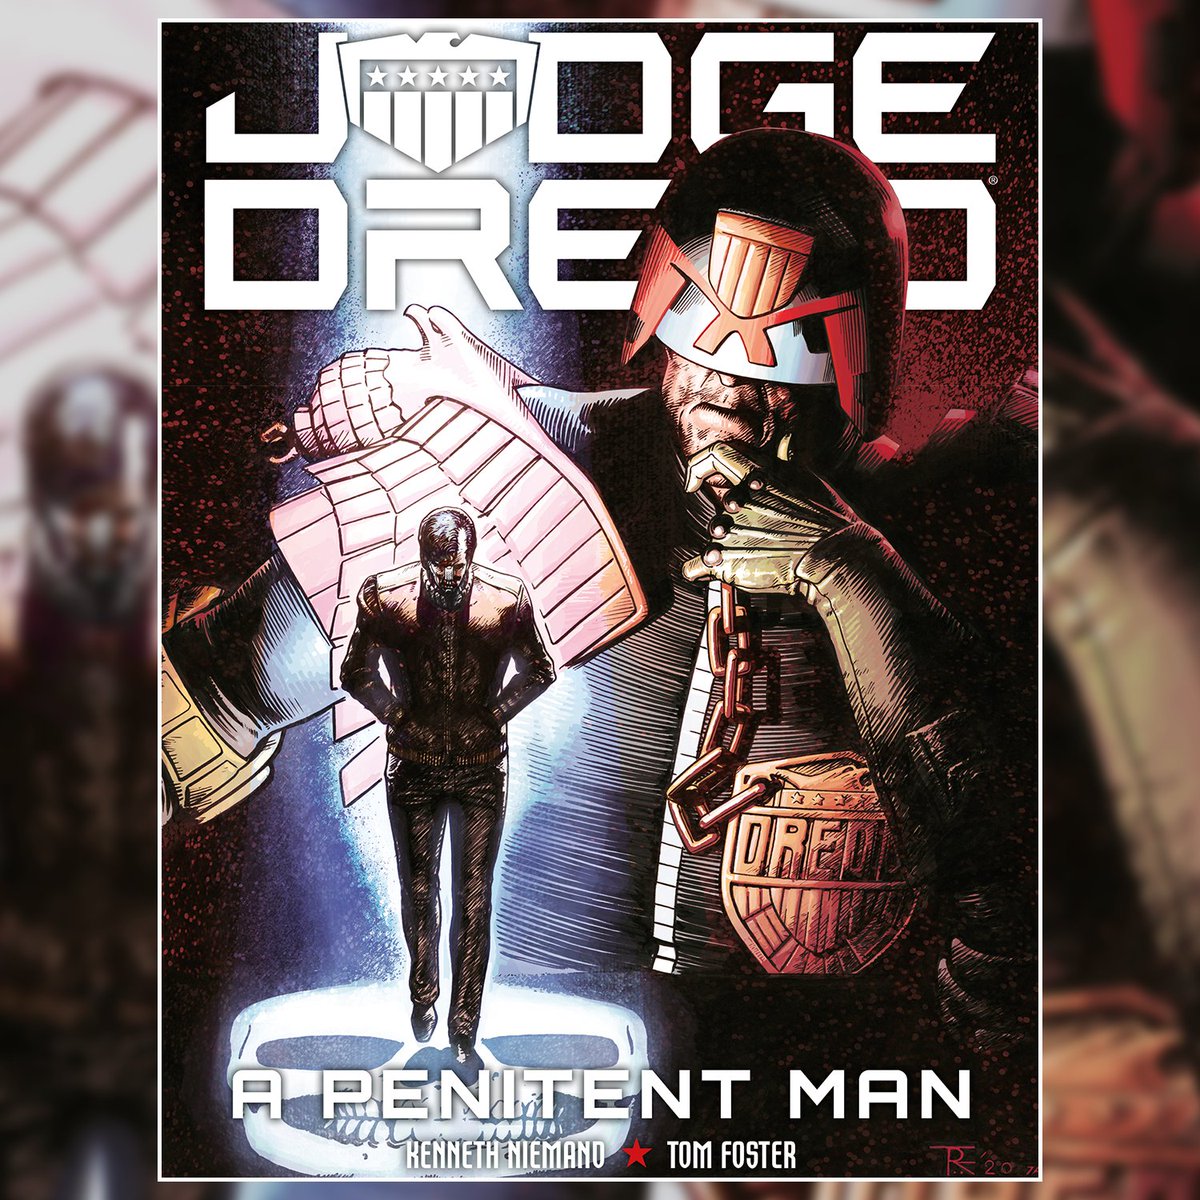 In 'Judge Dredd: A Penitent Man', former Judge, Kyle Asher returns from the penal colony on Titan after serving twenty years. But is there such a thing as a second chance in Mega-City One? Dredd isn't so sure...

Buy today: bit.ly/44FKXSe